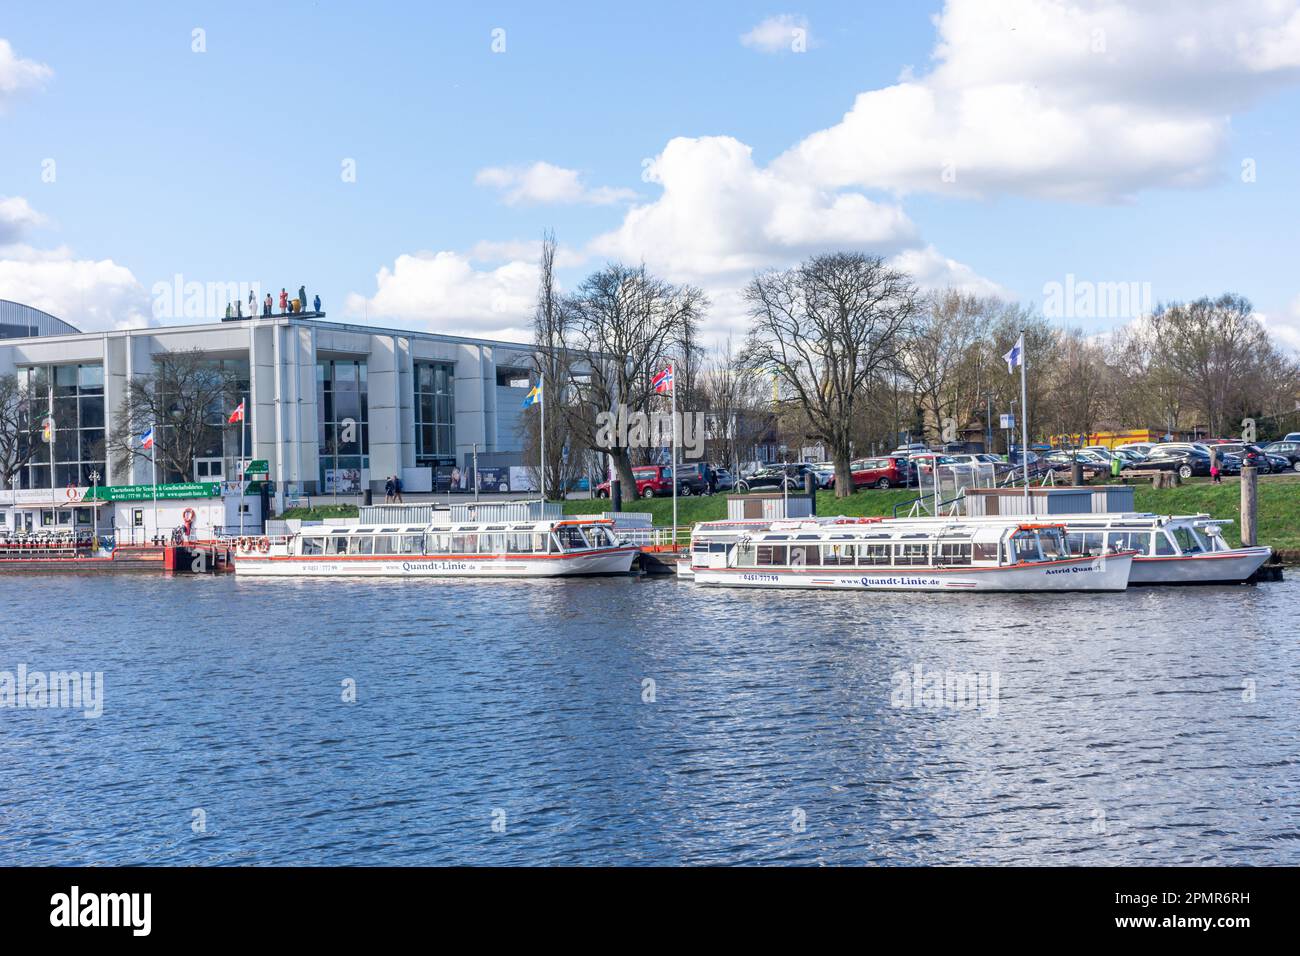 Musik und Kongresshalle (events venue) and river cruise boats across River Trave, Lübeck, Schleswig-Holstein, Federal Republic of Germany Stock Photo